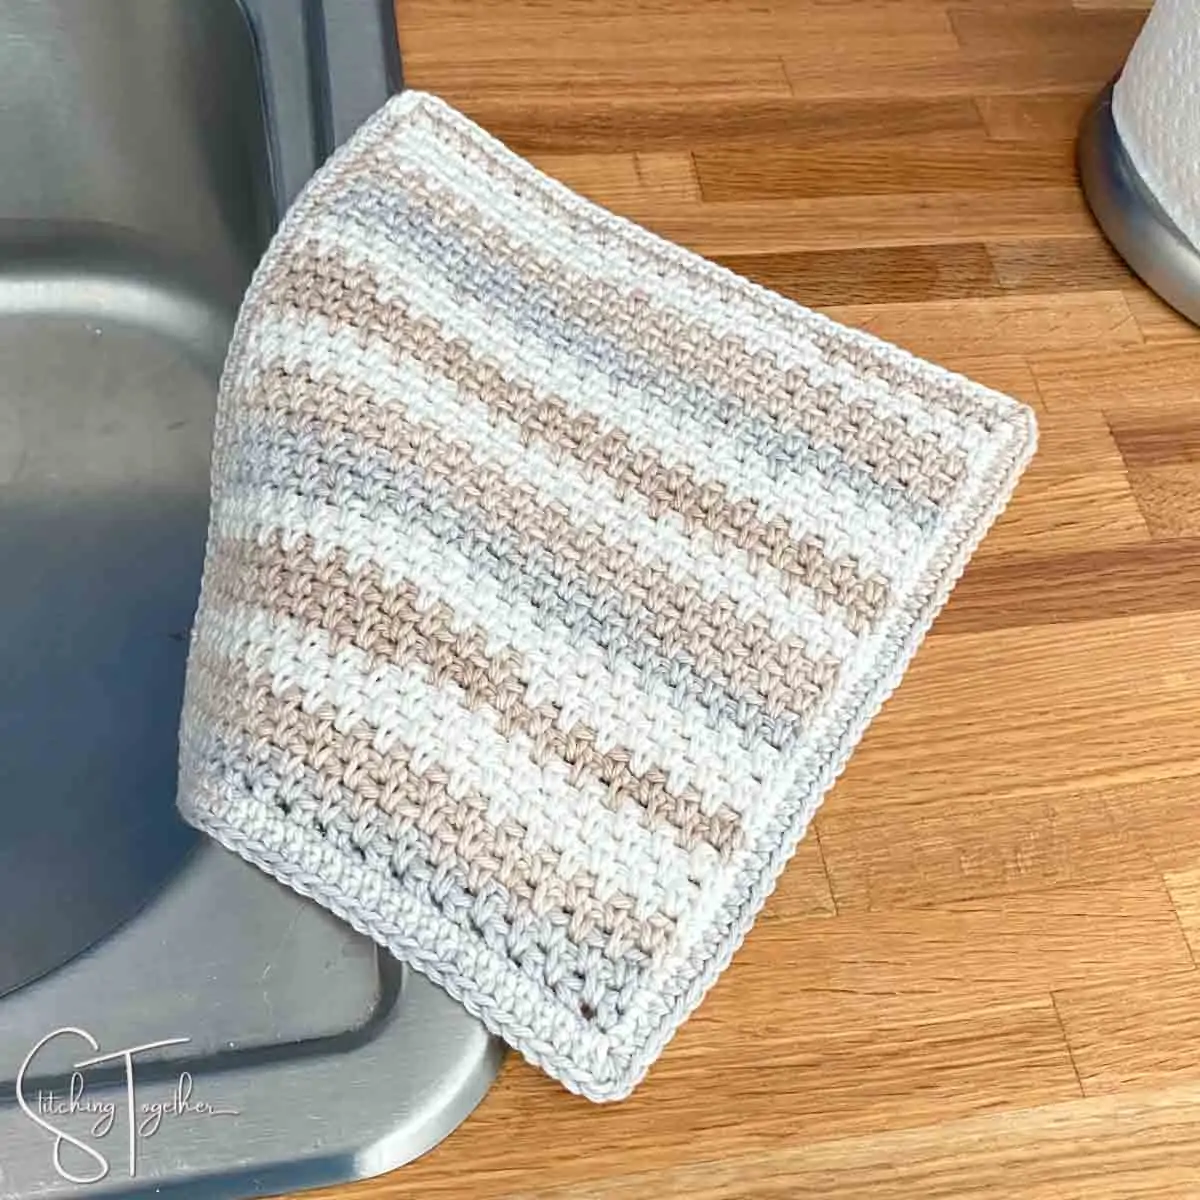 striped crochet moss stitch dishcloth on the side of a sink